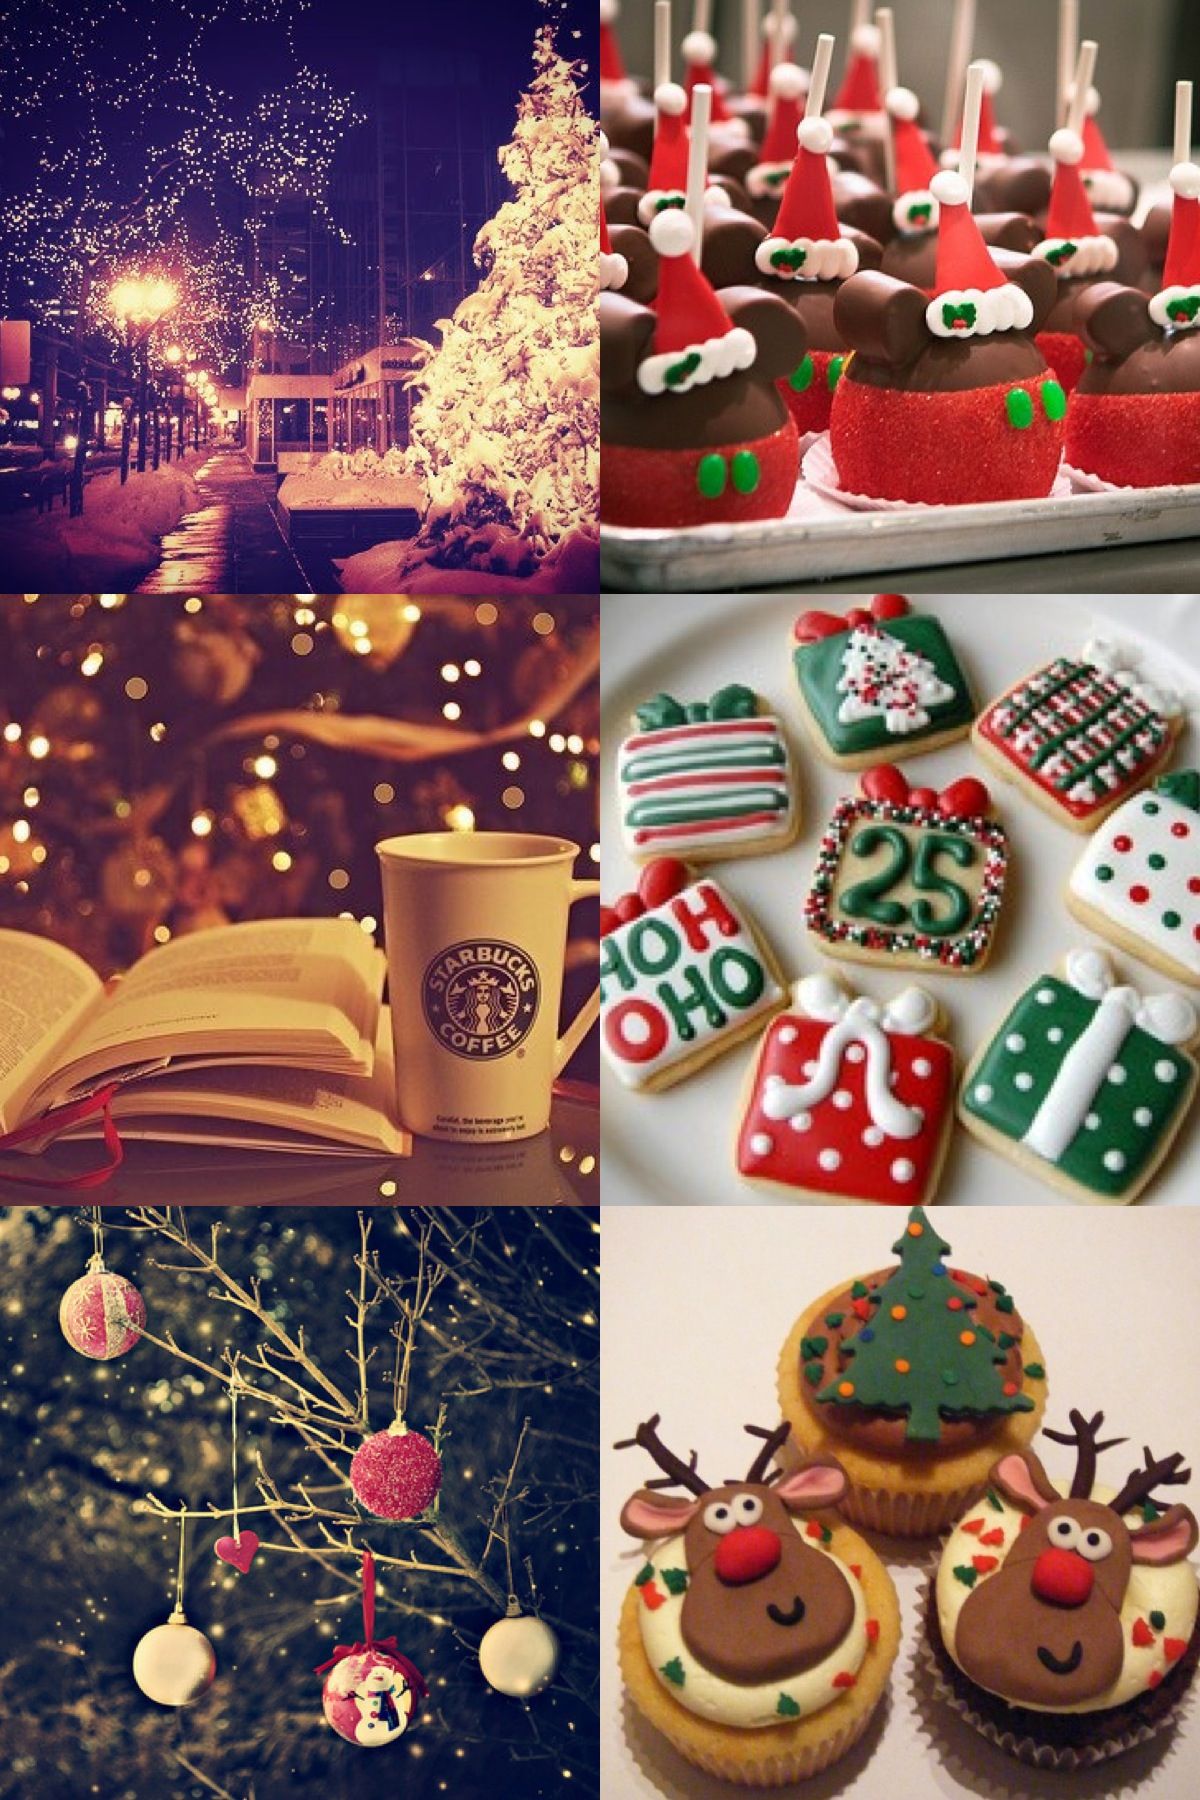 Christmas Collage Wallpapers